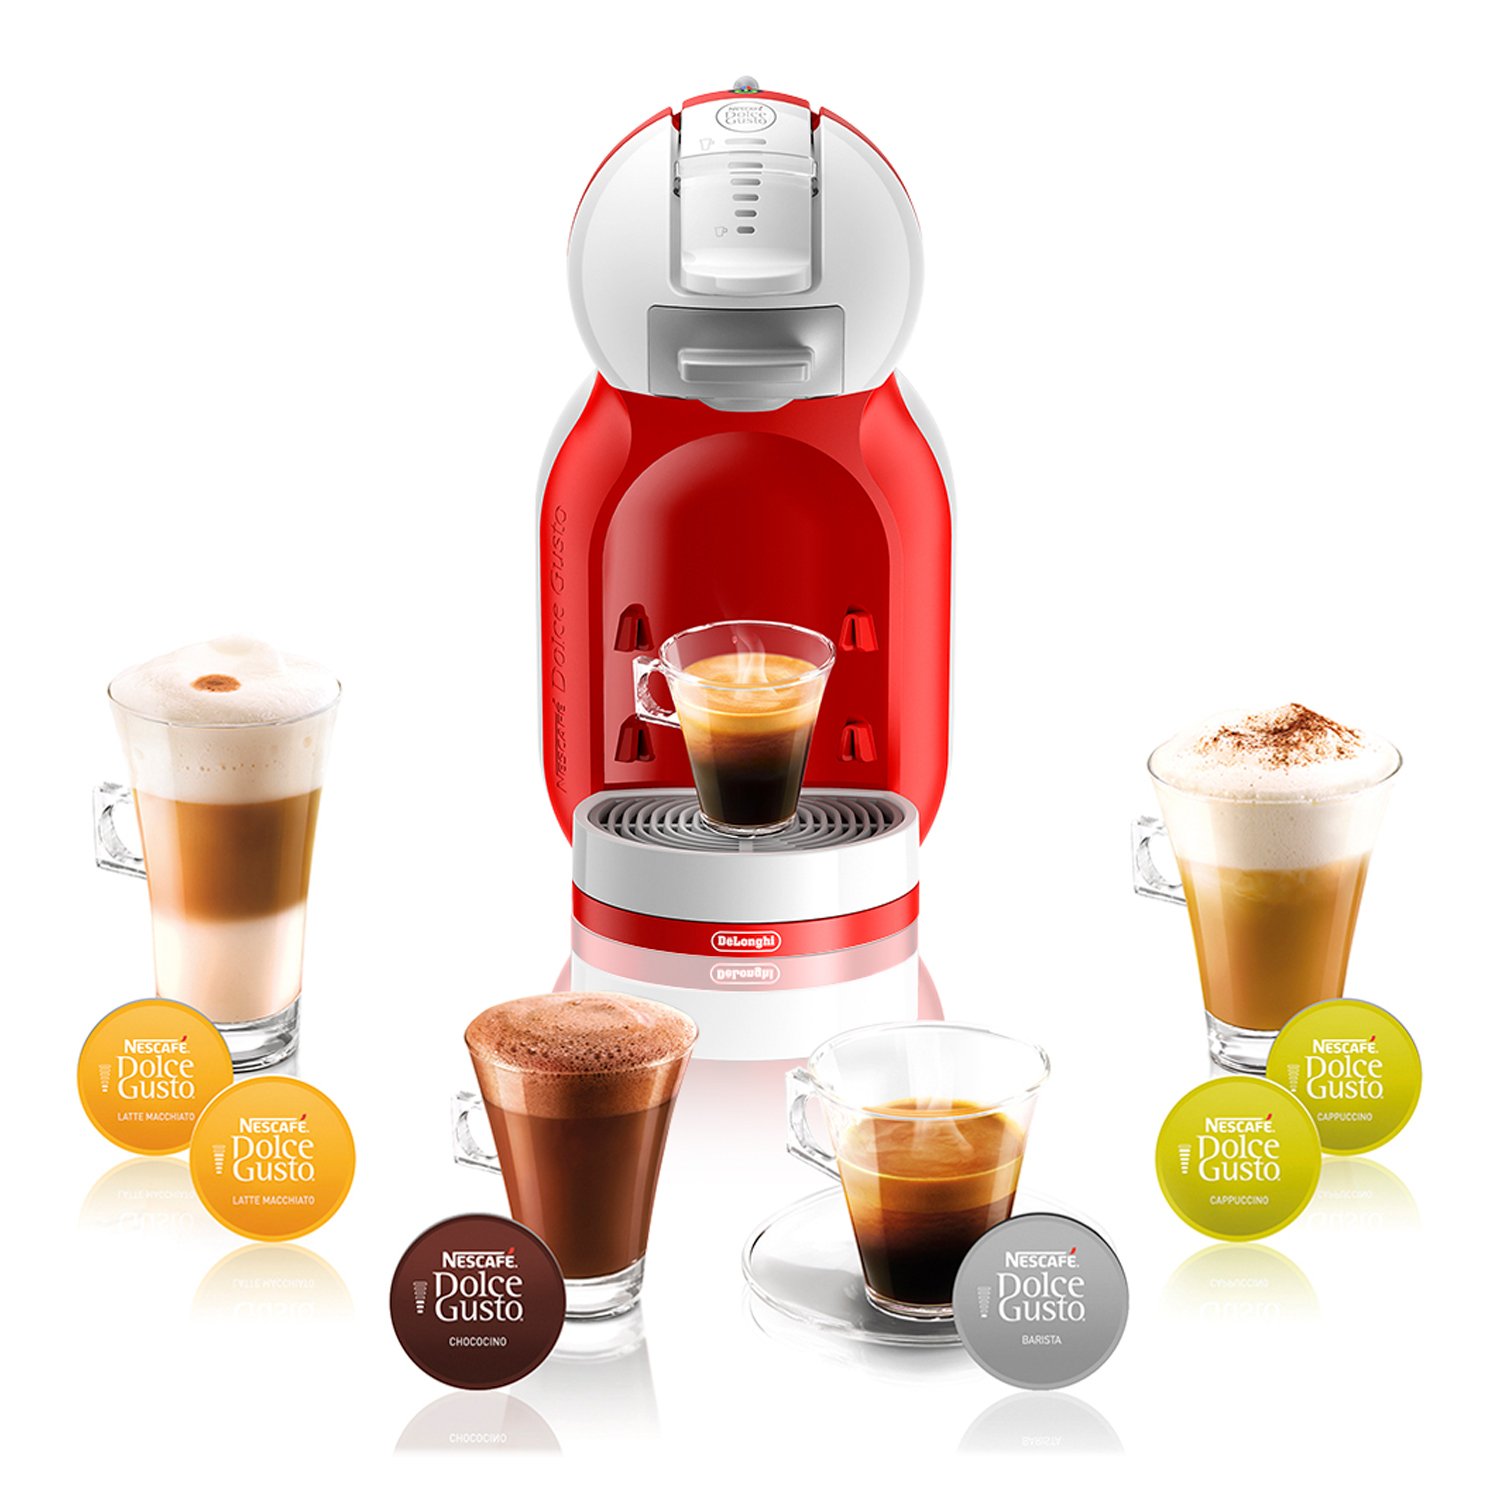 Dolce gusto цена. Капсулы Дольче густо. Кофе Дольче густо. Dolce gusto edg455tex1. Нескафе Дольче густо.